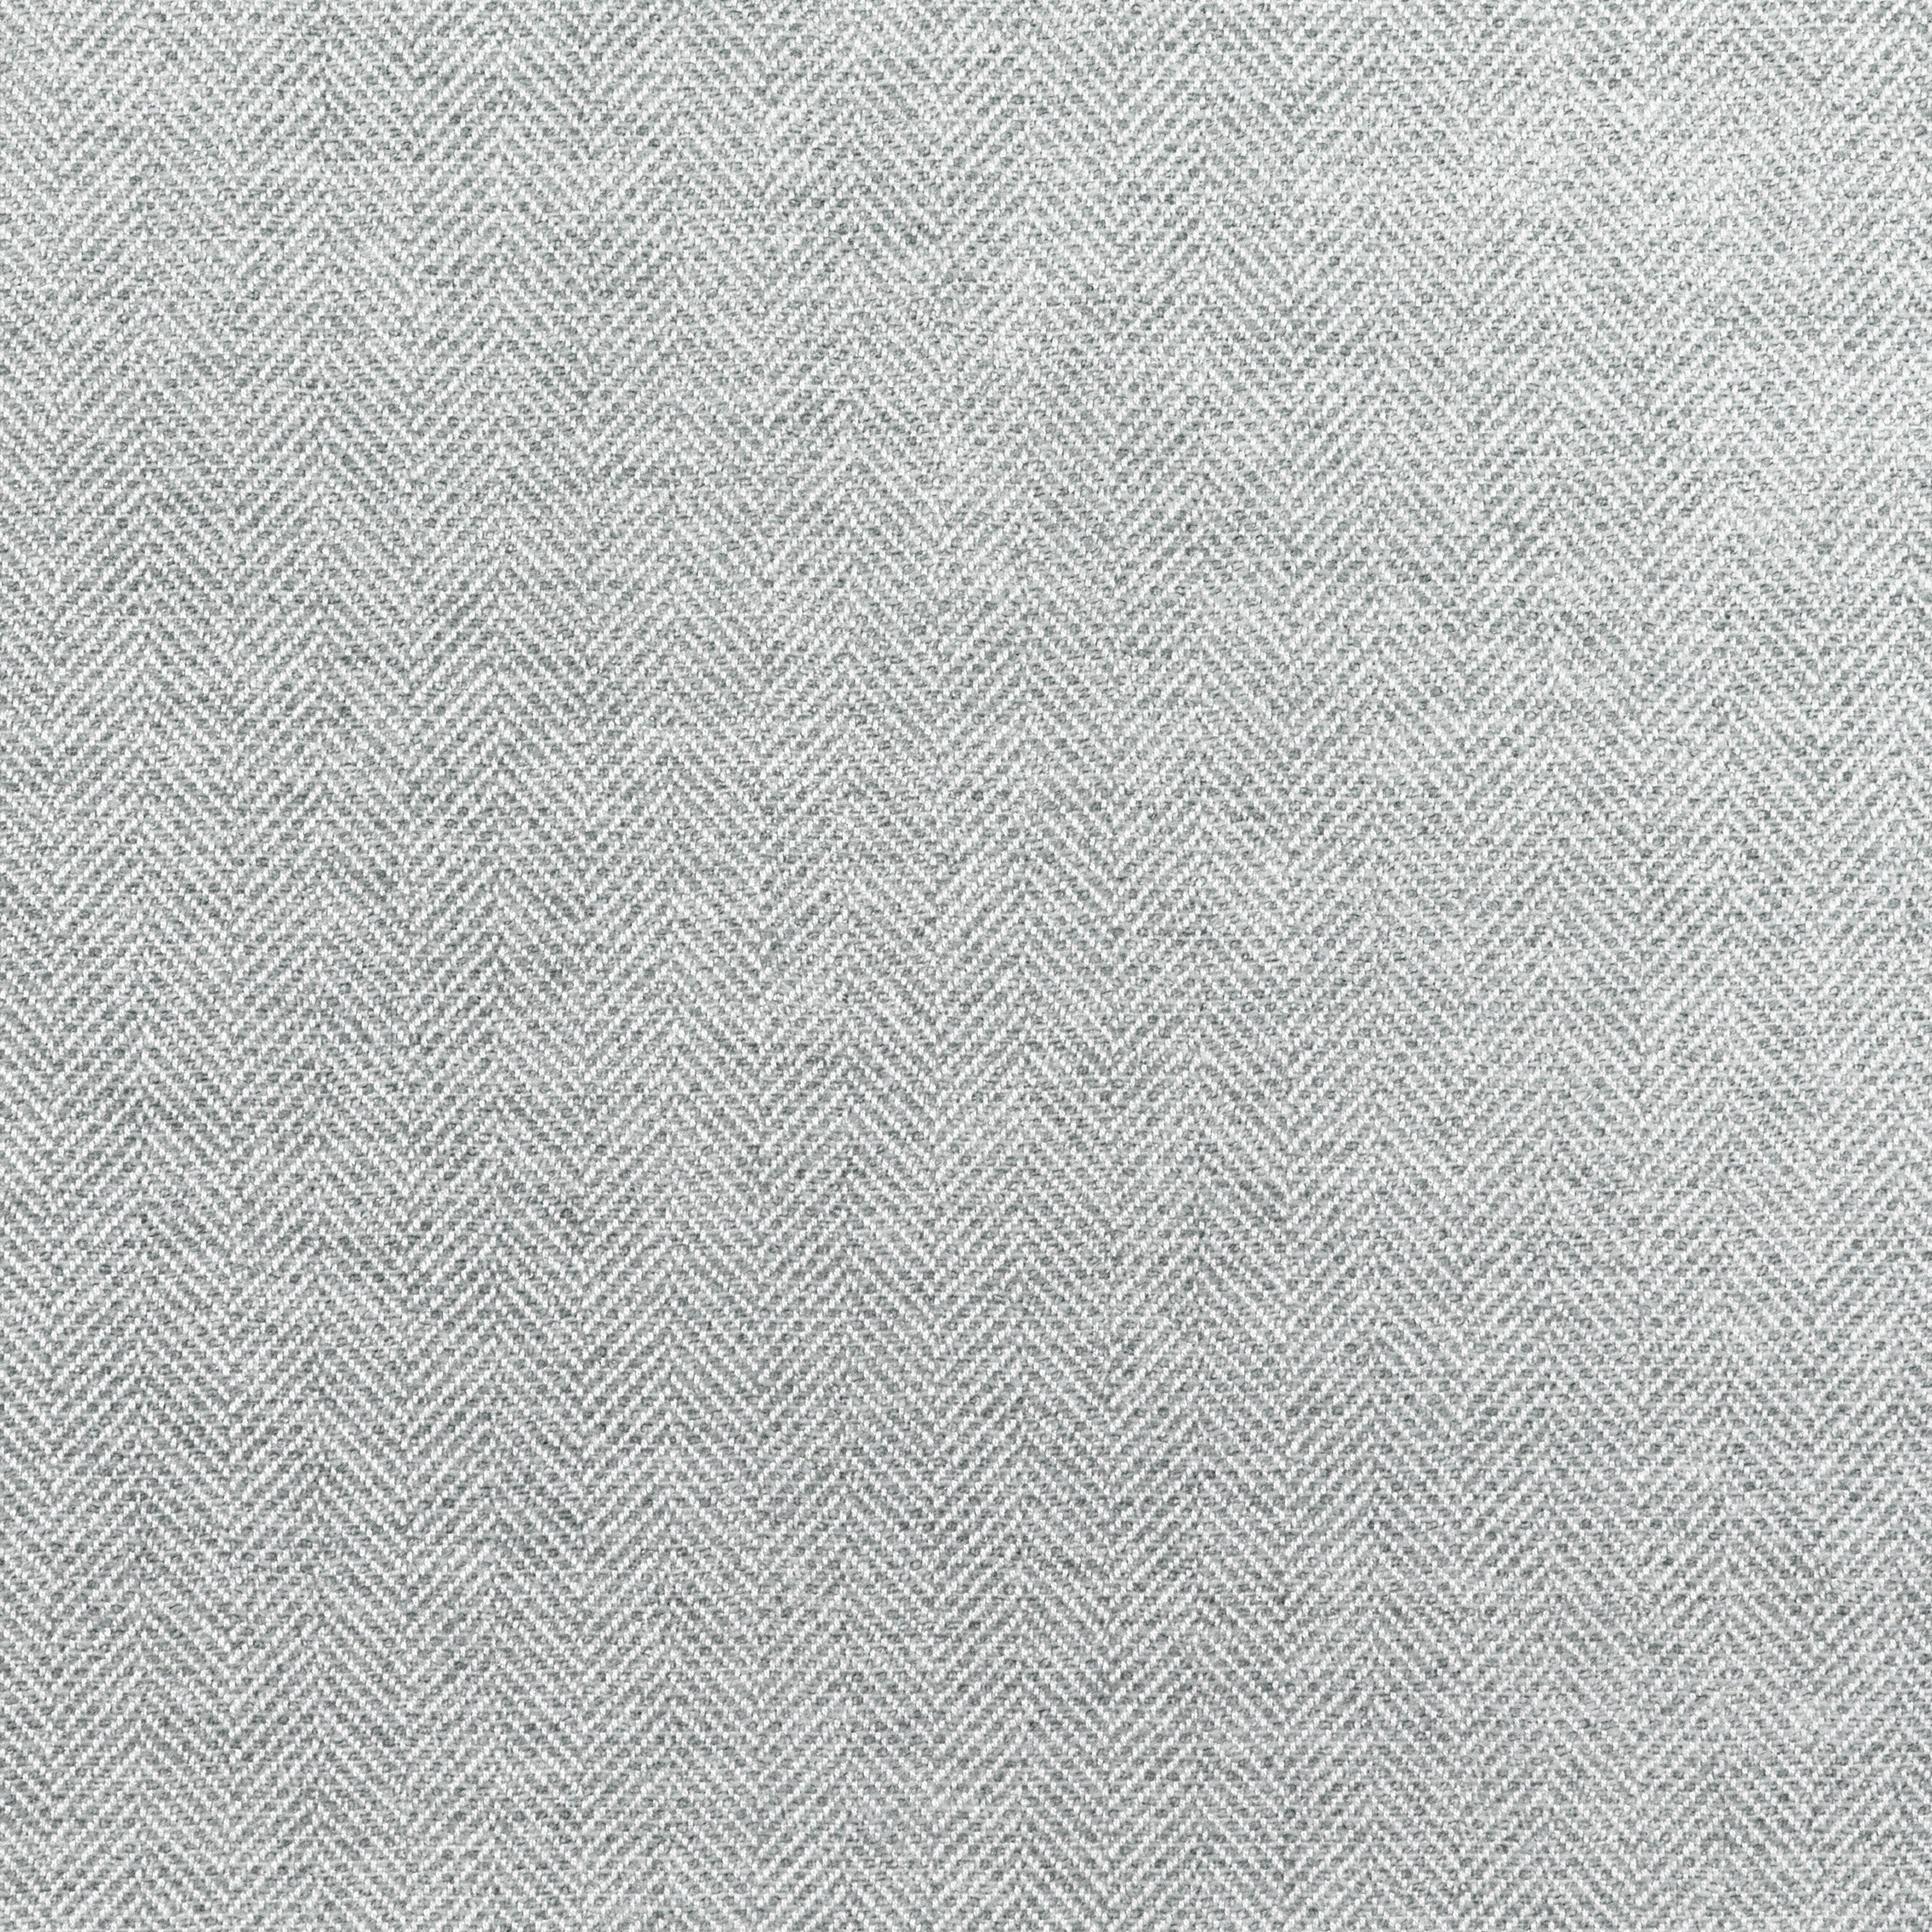 Light Gray Fabric Texture - Close-up On The Fabric With A Herringbone  Pattern Stock Photo, Picture and Royalty Free Image. Image 153776095.